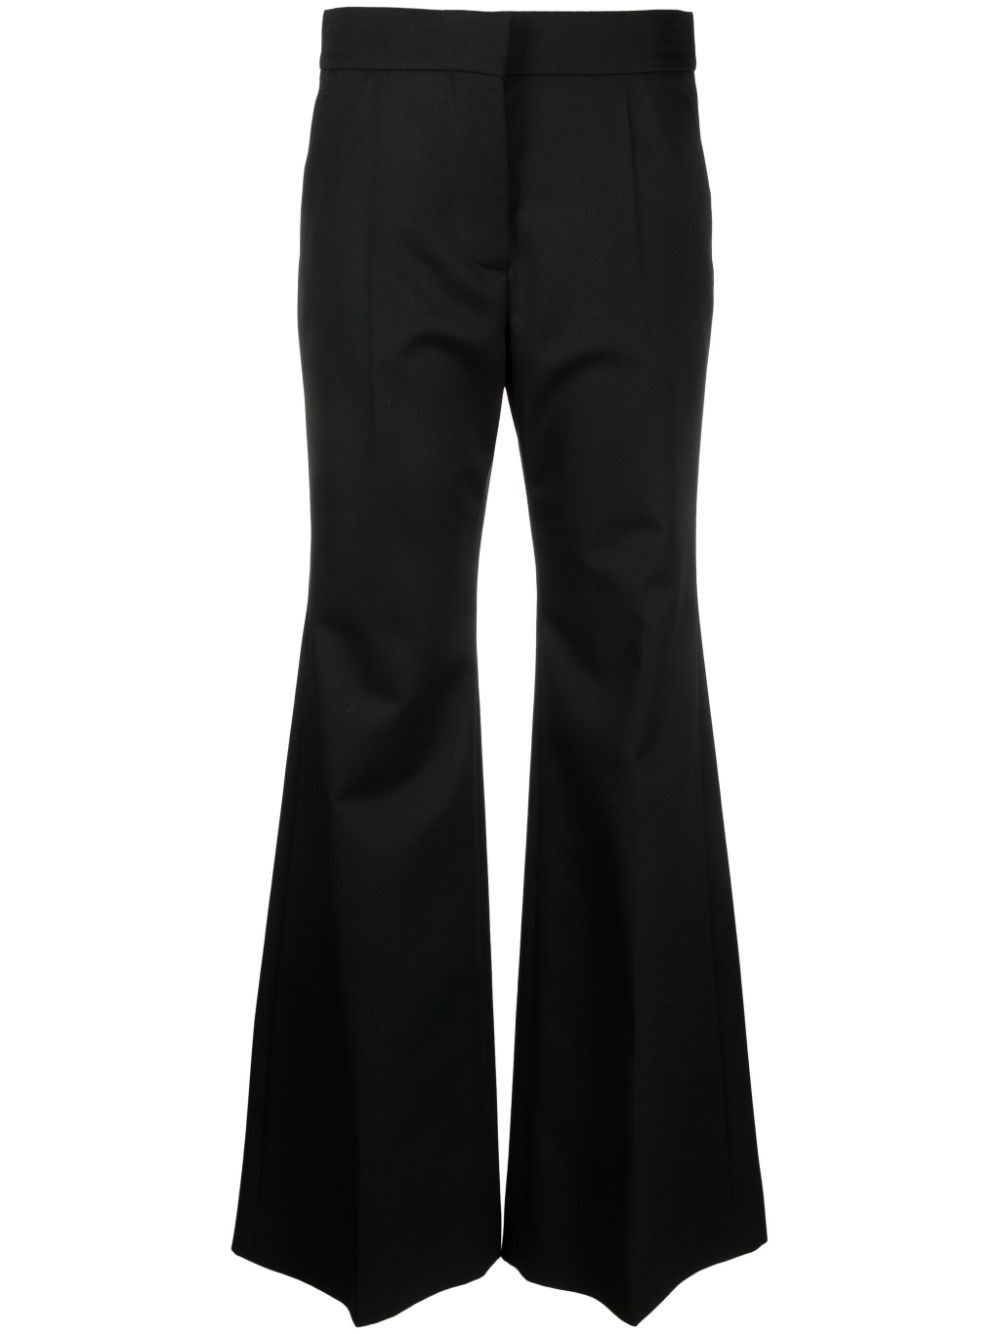 GIVENCHY FLARE TAILORED PANTS